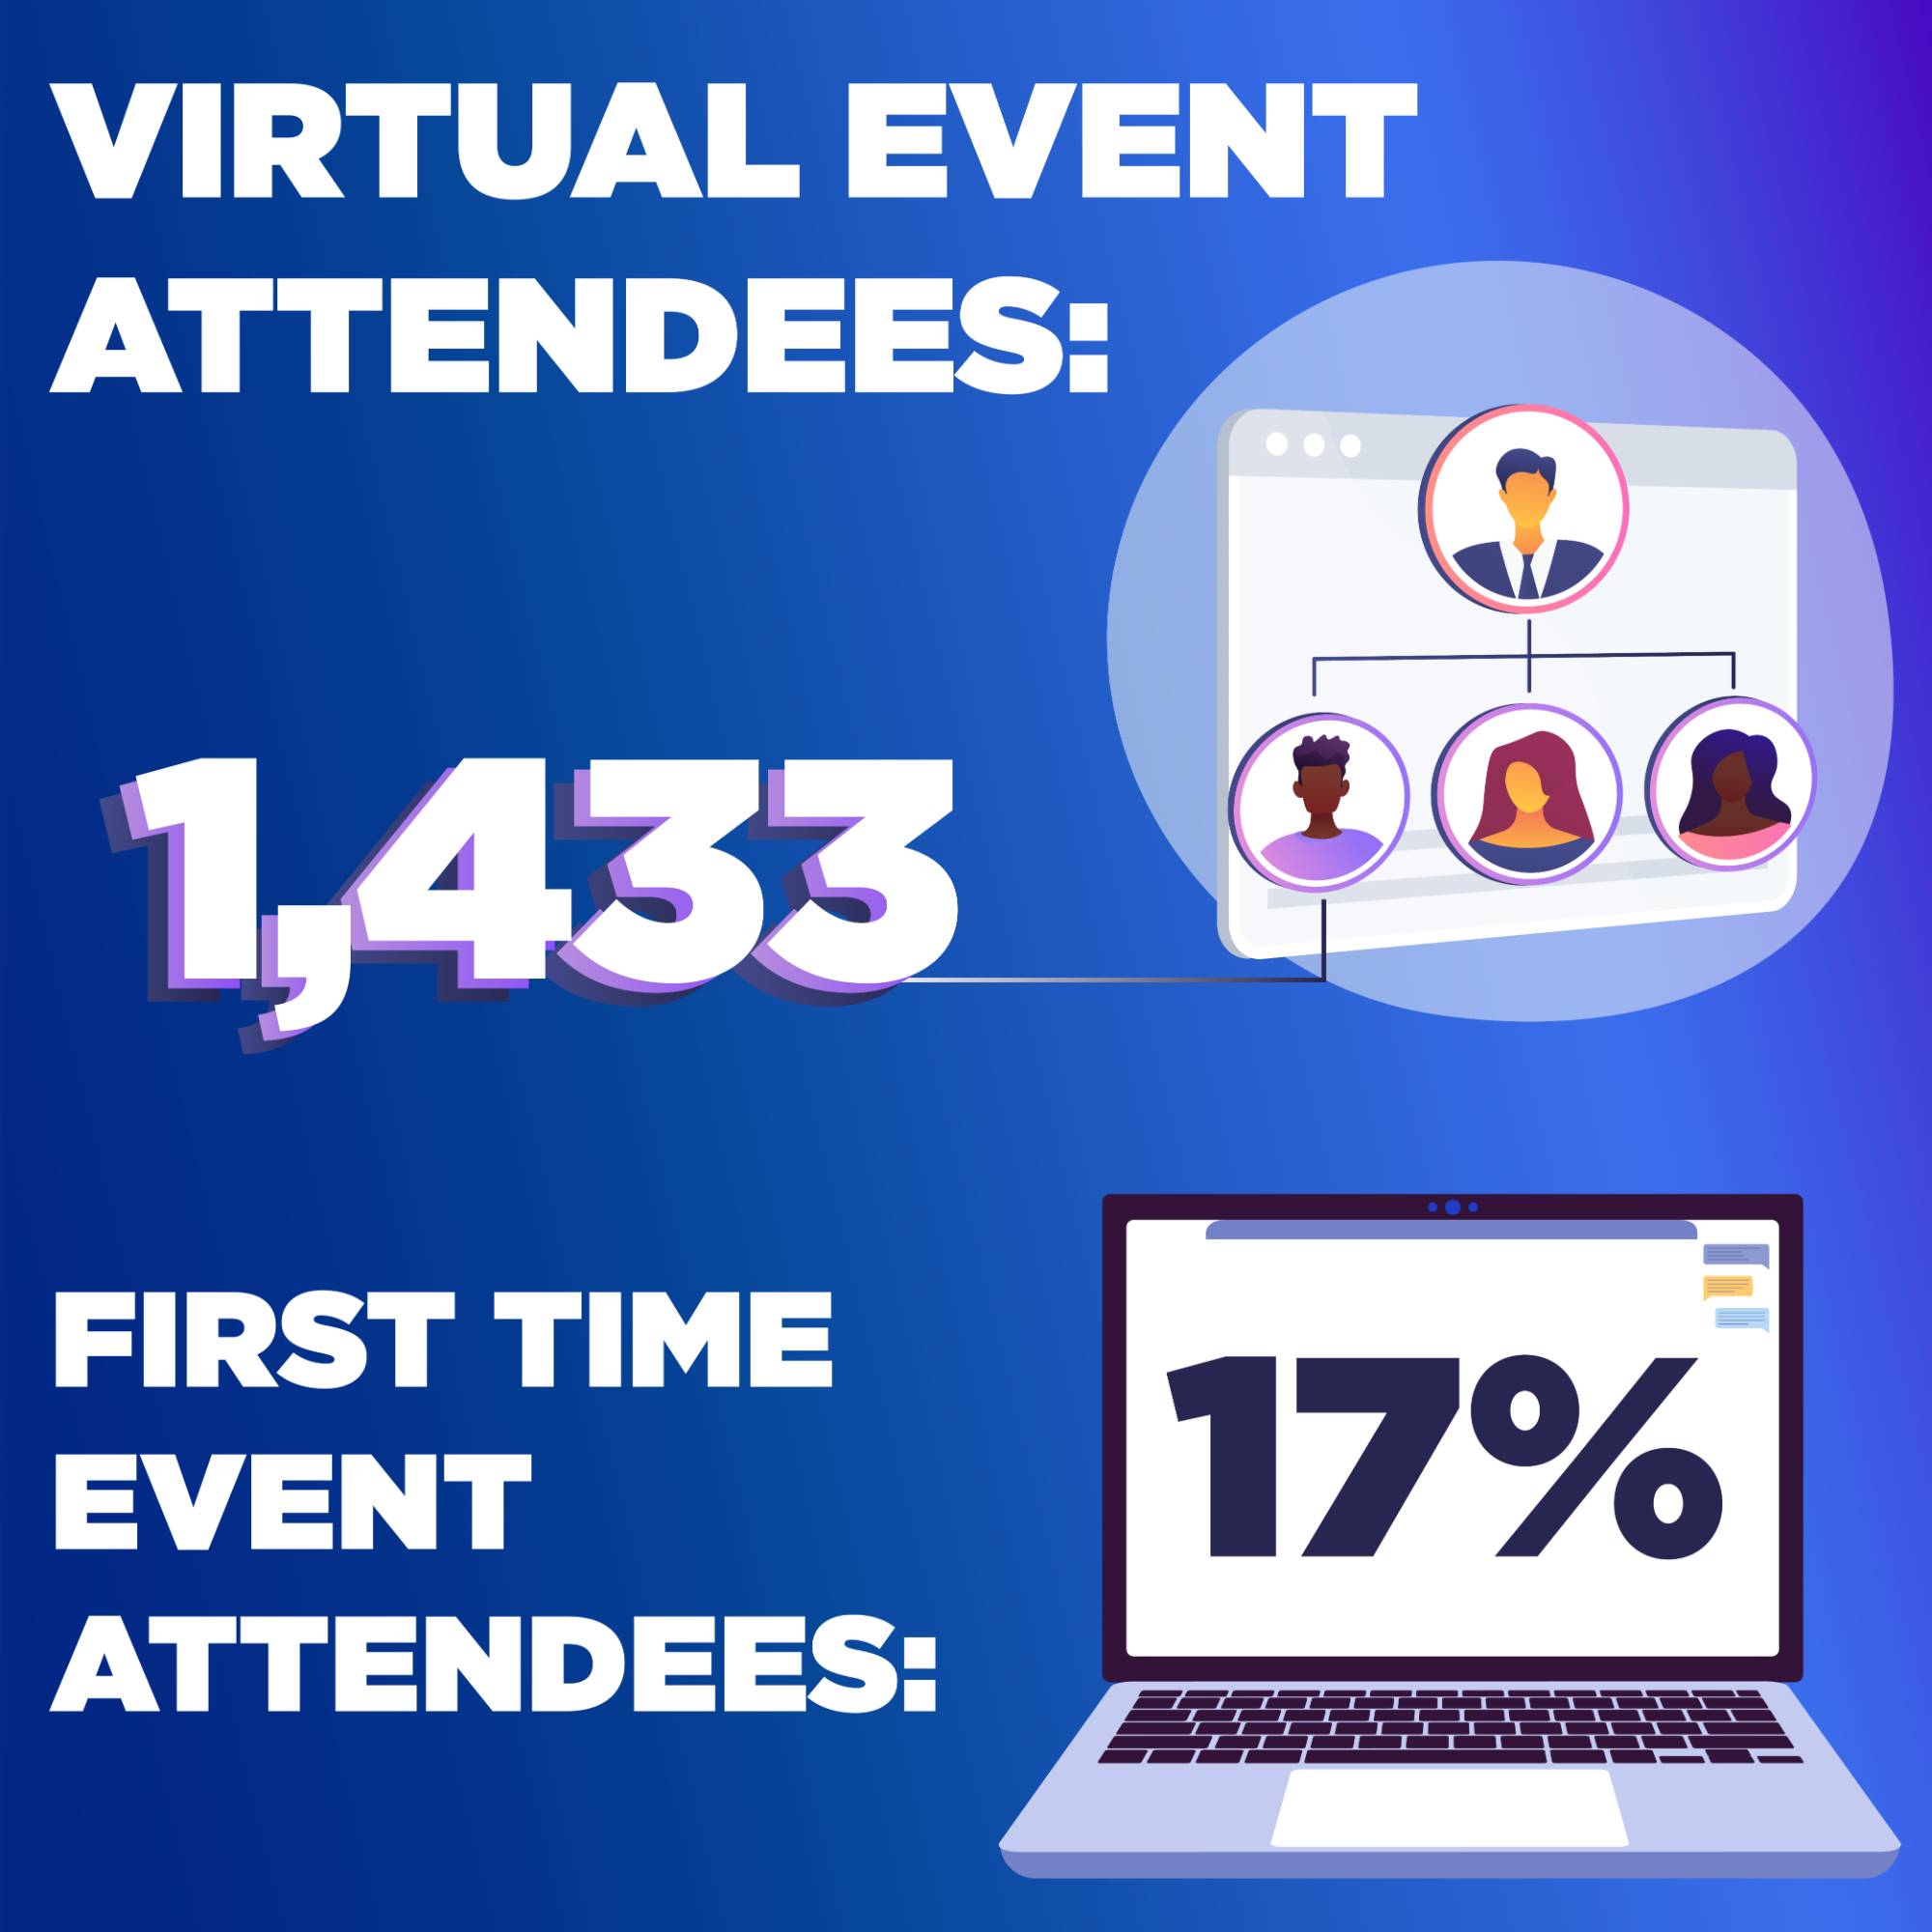 A total of 1,433 people attended these virtual events. Of the attendees, 17% attended for their first time.